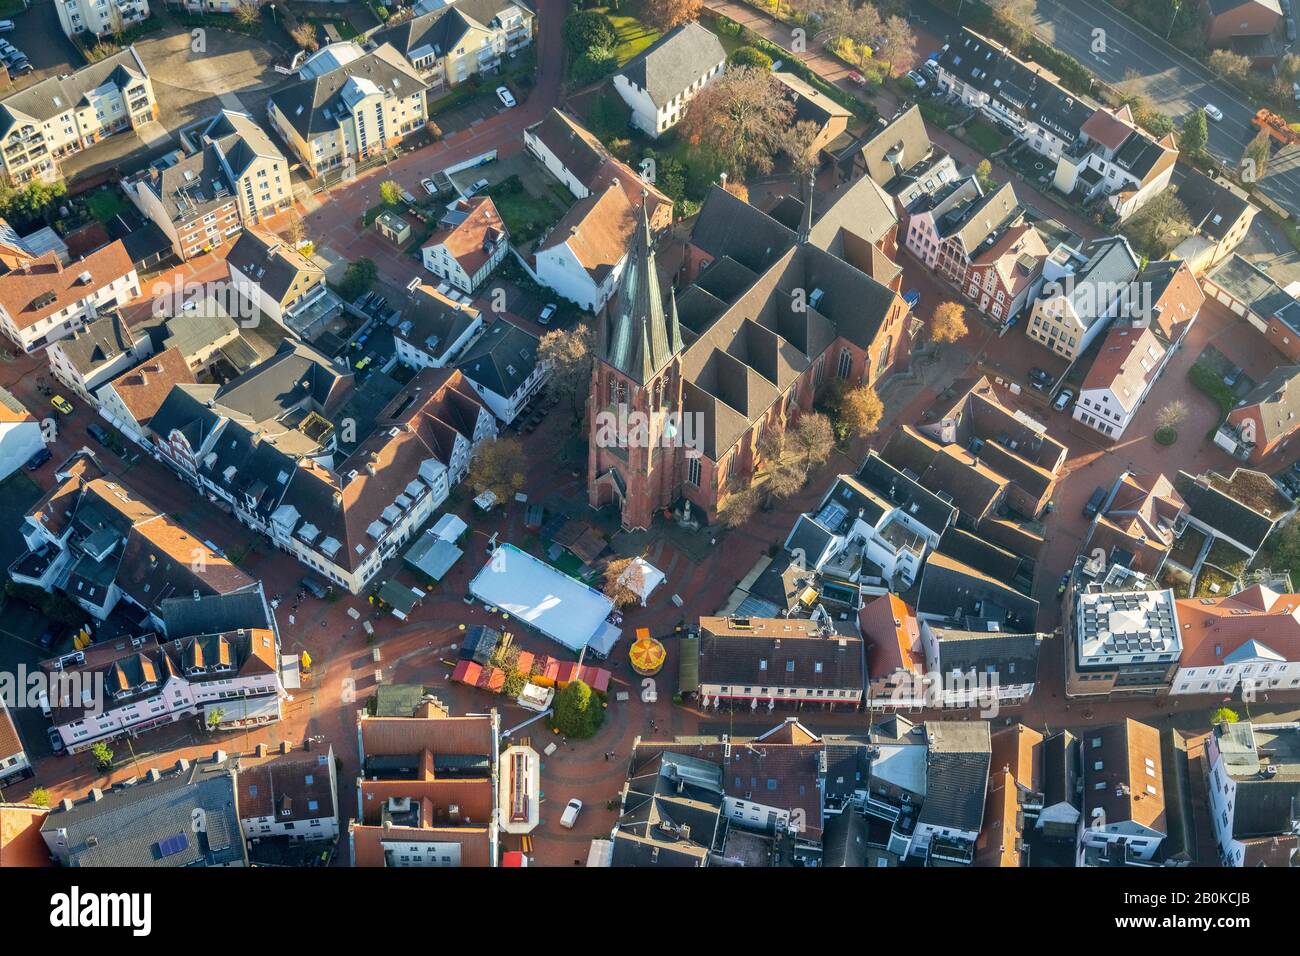 Aerial view, St. Sixtus church, market, ice rink, Christmas market, downtown view old town, historical buildings, Haltern am See, Ruhr area, North Rhi Stock Photo